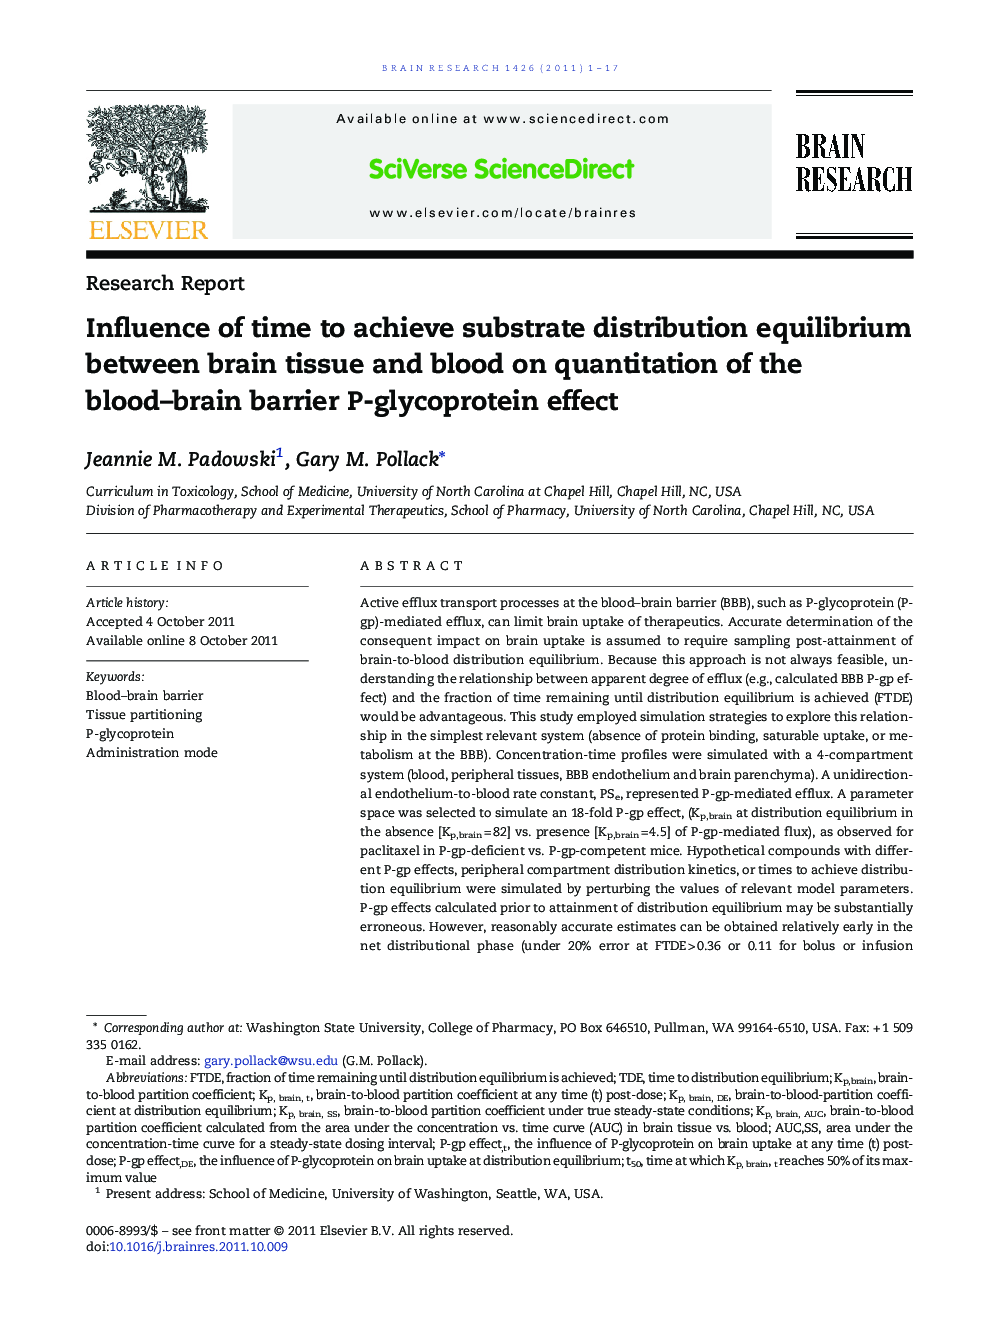 Research ReportInfluence of time to achieve substrate distribution equilibrium between brain tissue and blood on quantitation of the blood-brain barrier P-glycoprotein effect